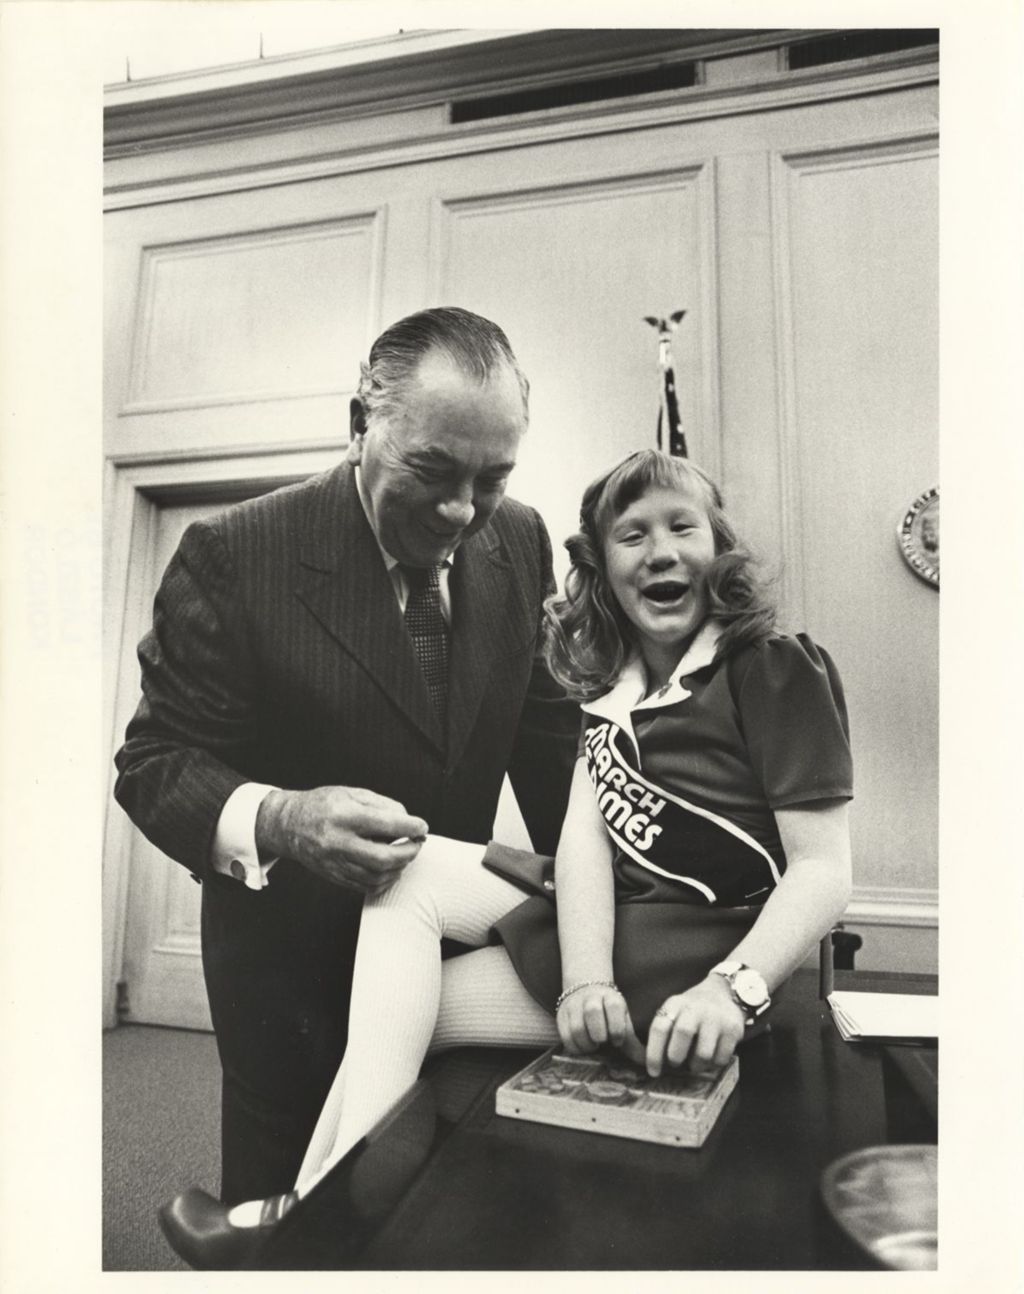 Miniature of Richard J. Daley and girl wearing March of Dimes sash